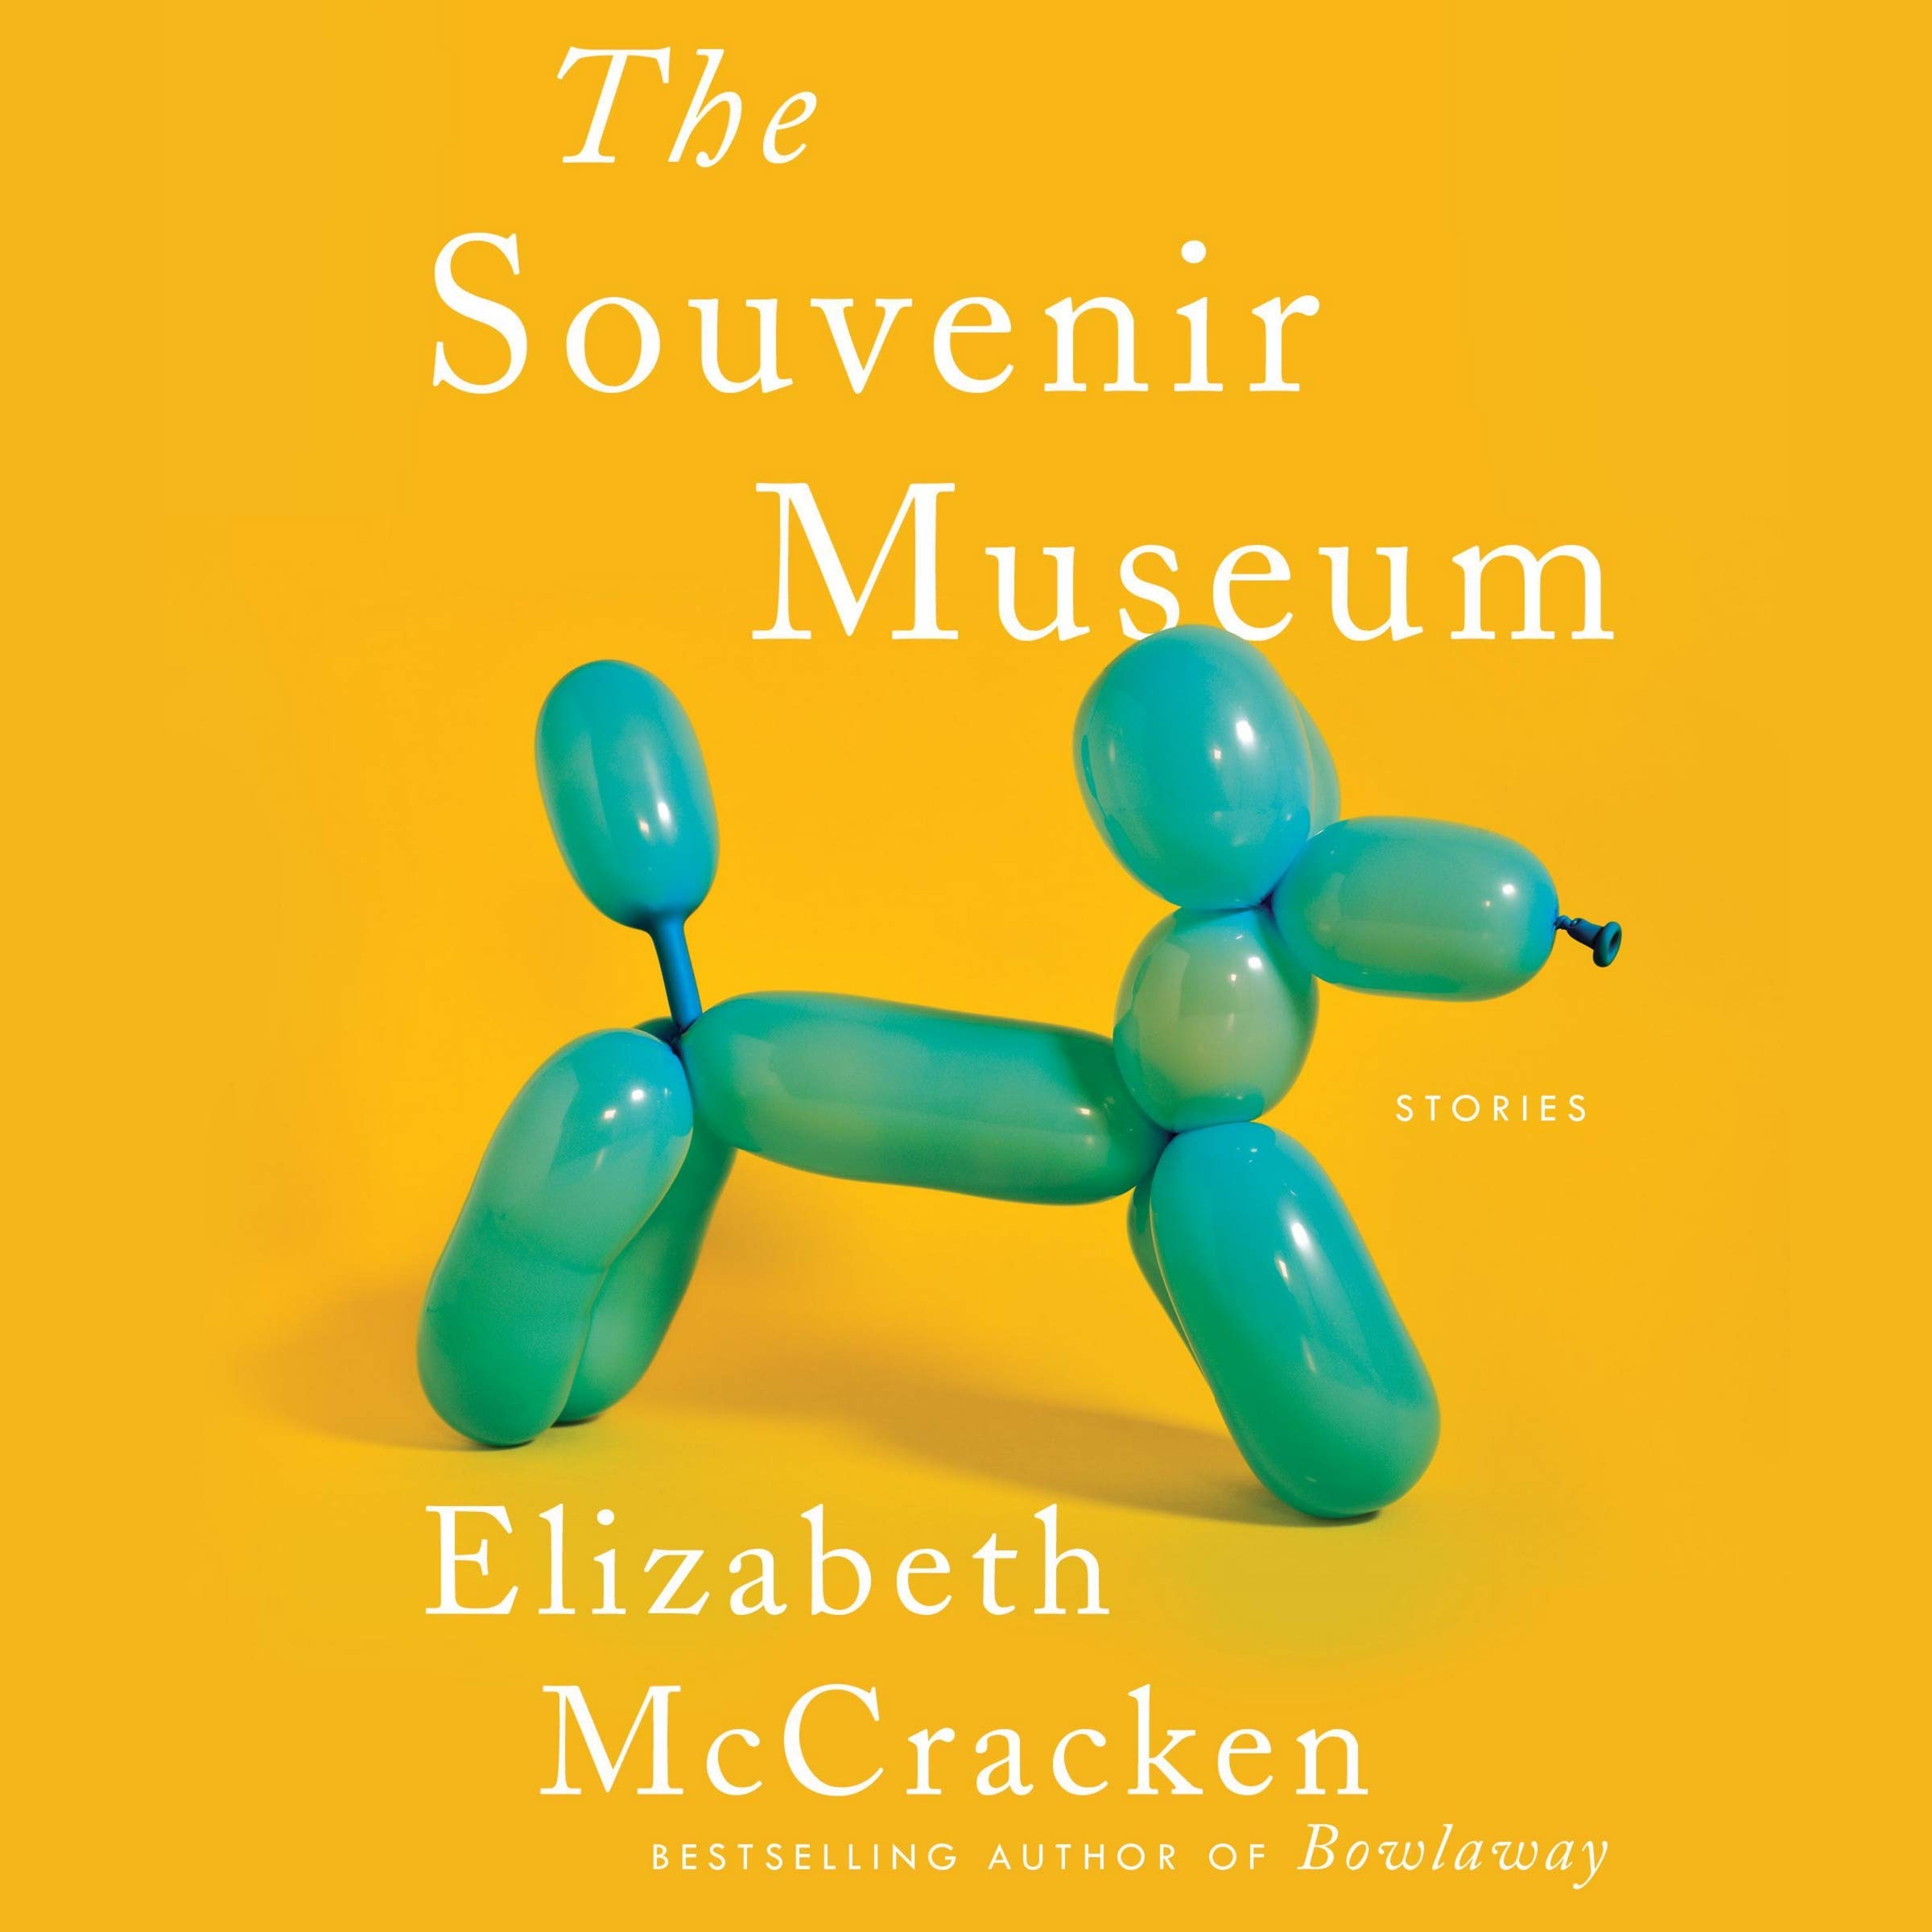 Cover of The Souvenir Museum by Elizabeth McCracken, the anthology from which this piece is excerpted. The cover shows a teal balloon dog on a bright yellow background, with the title and author's name in white sans serif font.